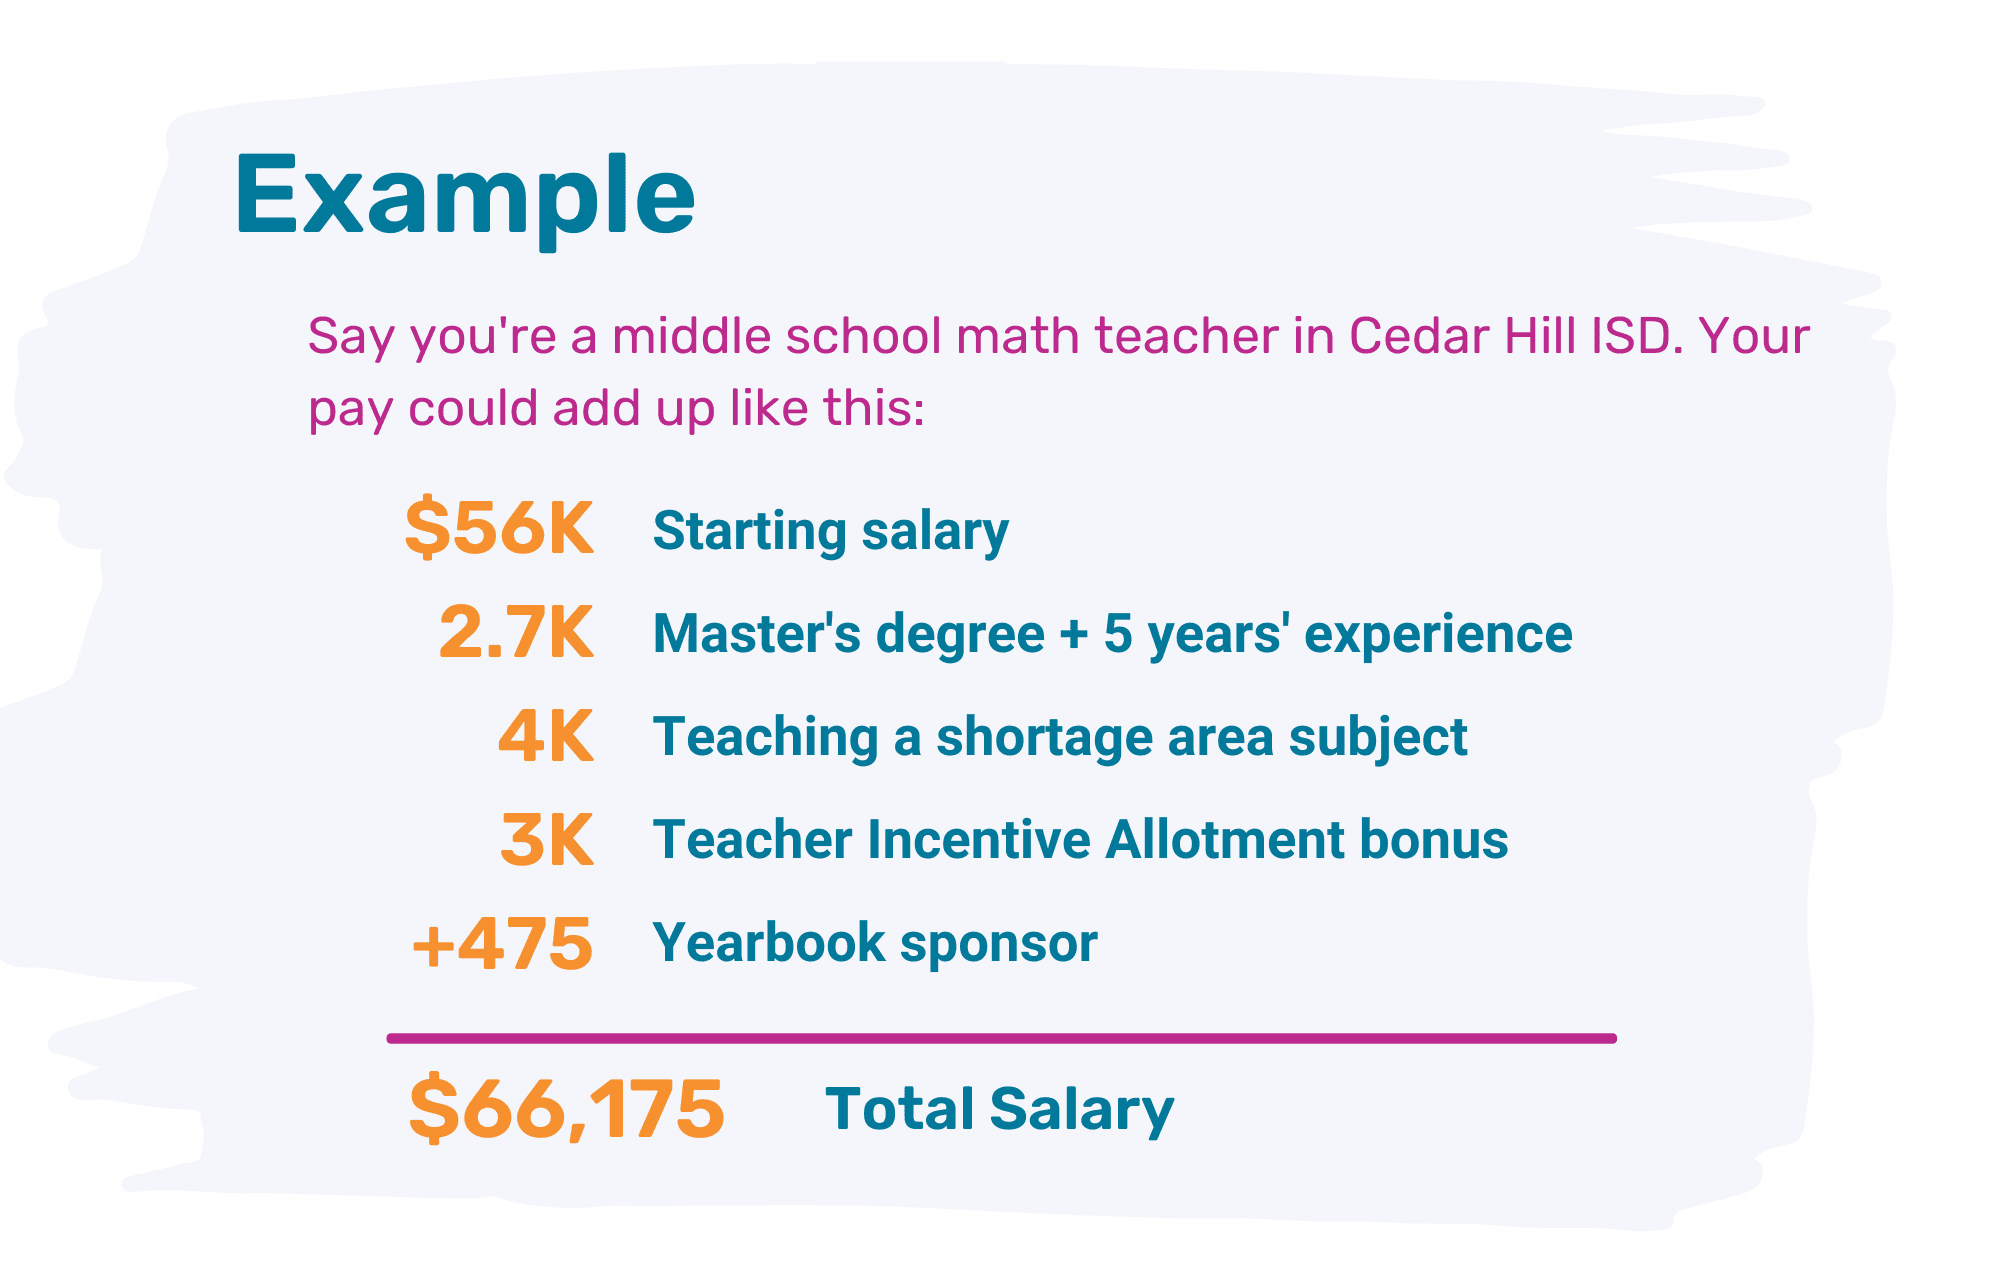 An example of how a teacher could increase salary. A middle school math teacher in Cedar Hill ISD could earn a $56K base salary plus stipends and bonuses for a master’s and five years’ experience + teaching in a shortage area + the Teacher Incentive Allotment + working as the yearbook sponsor, adding up to a total salary of $66,175. 